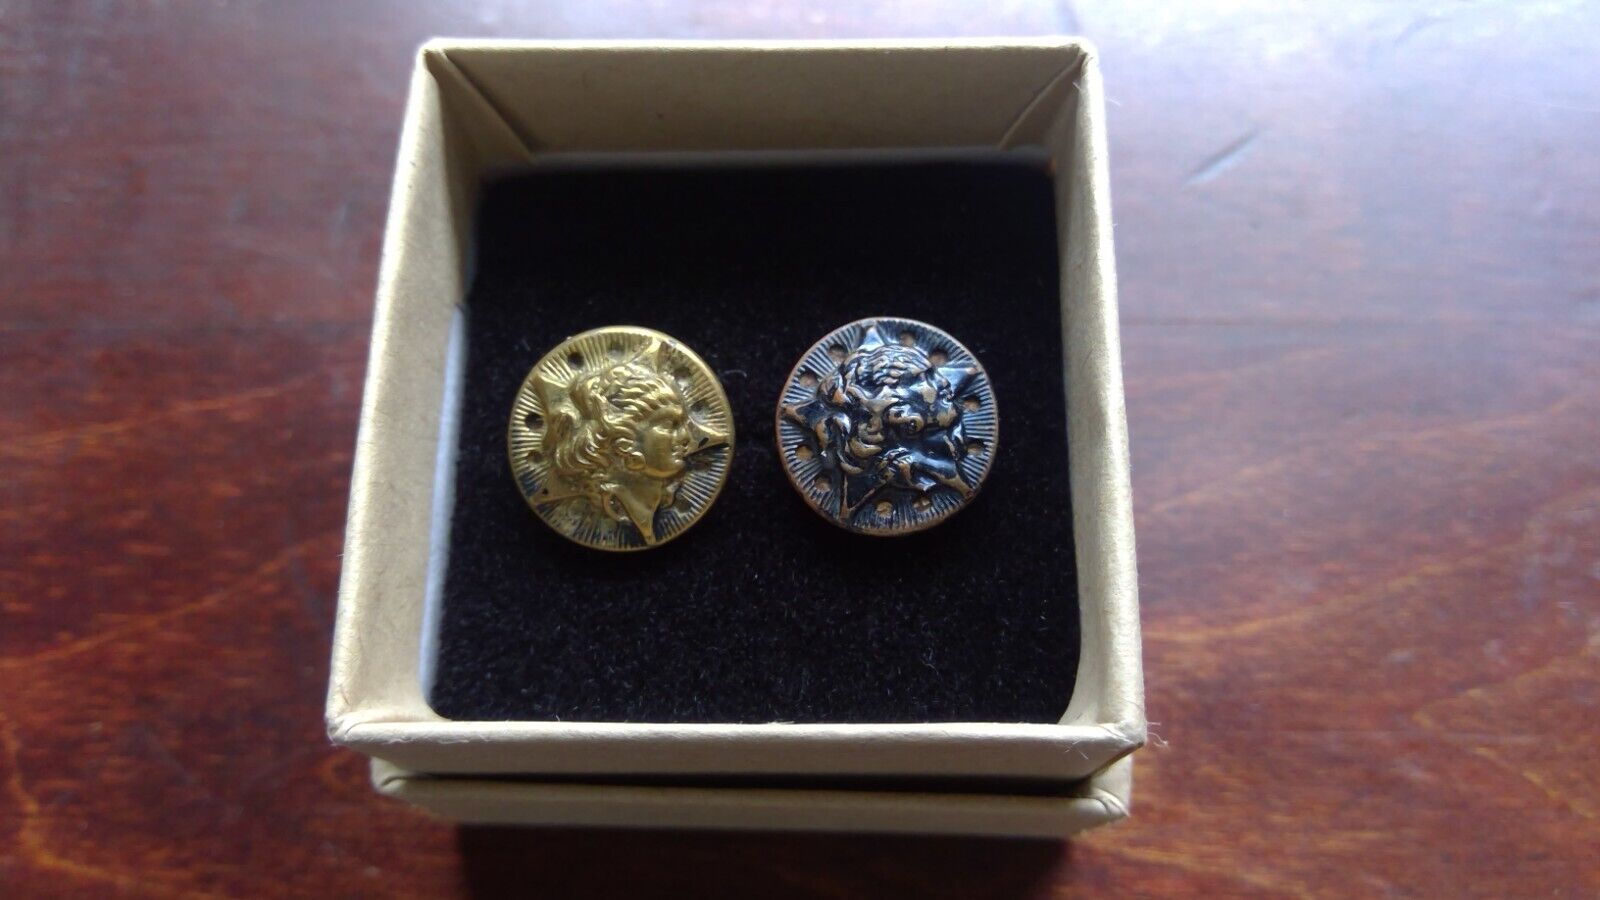 Astrea Antique Metal Brass Victorian Picture Buttons 15mm Lot of 2, 9/16th Inch Без бренда - фотография #3